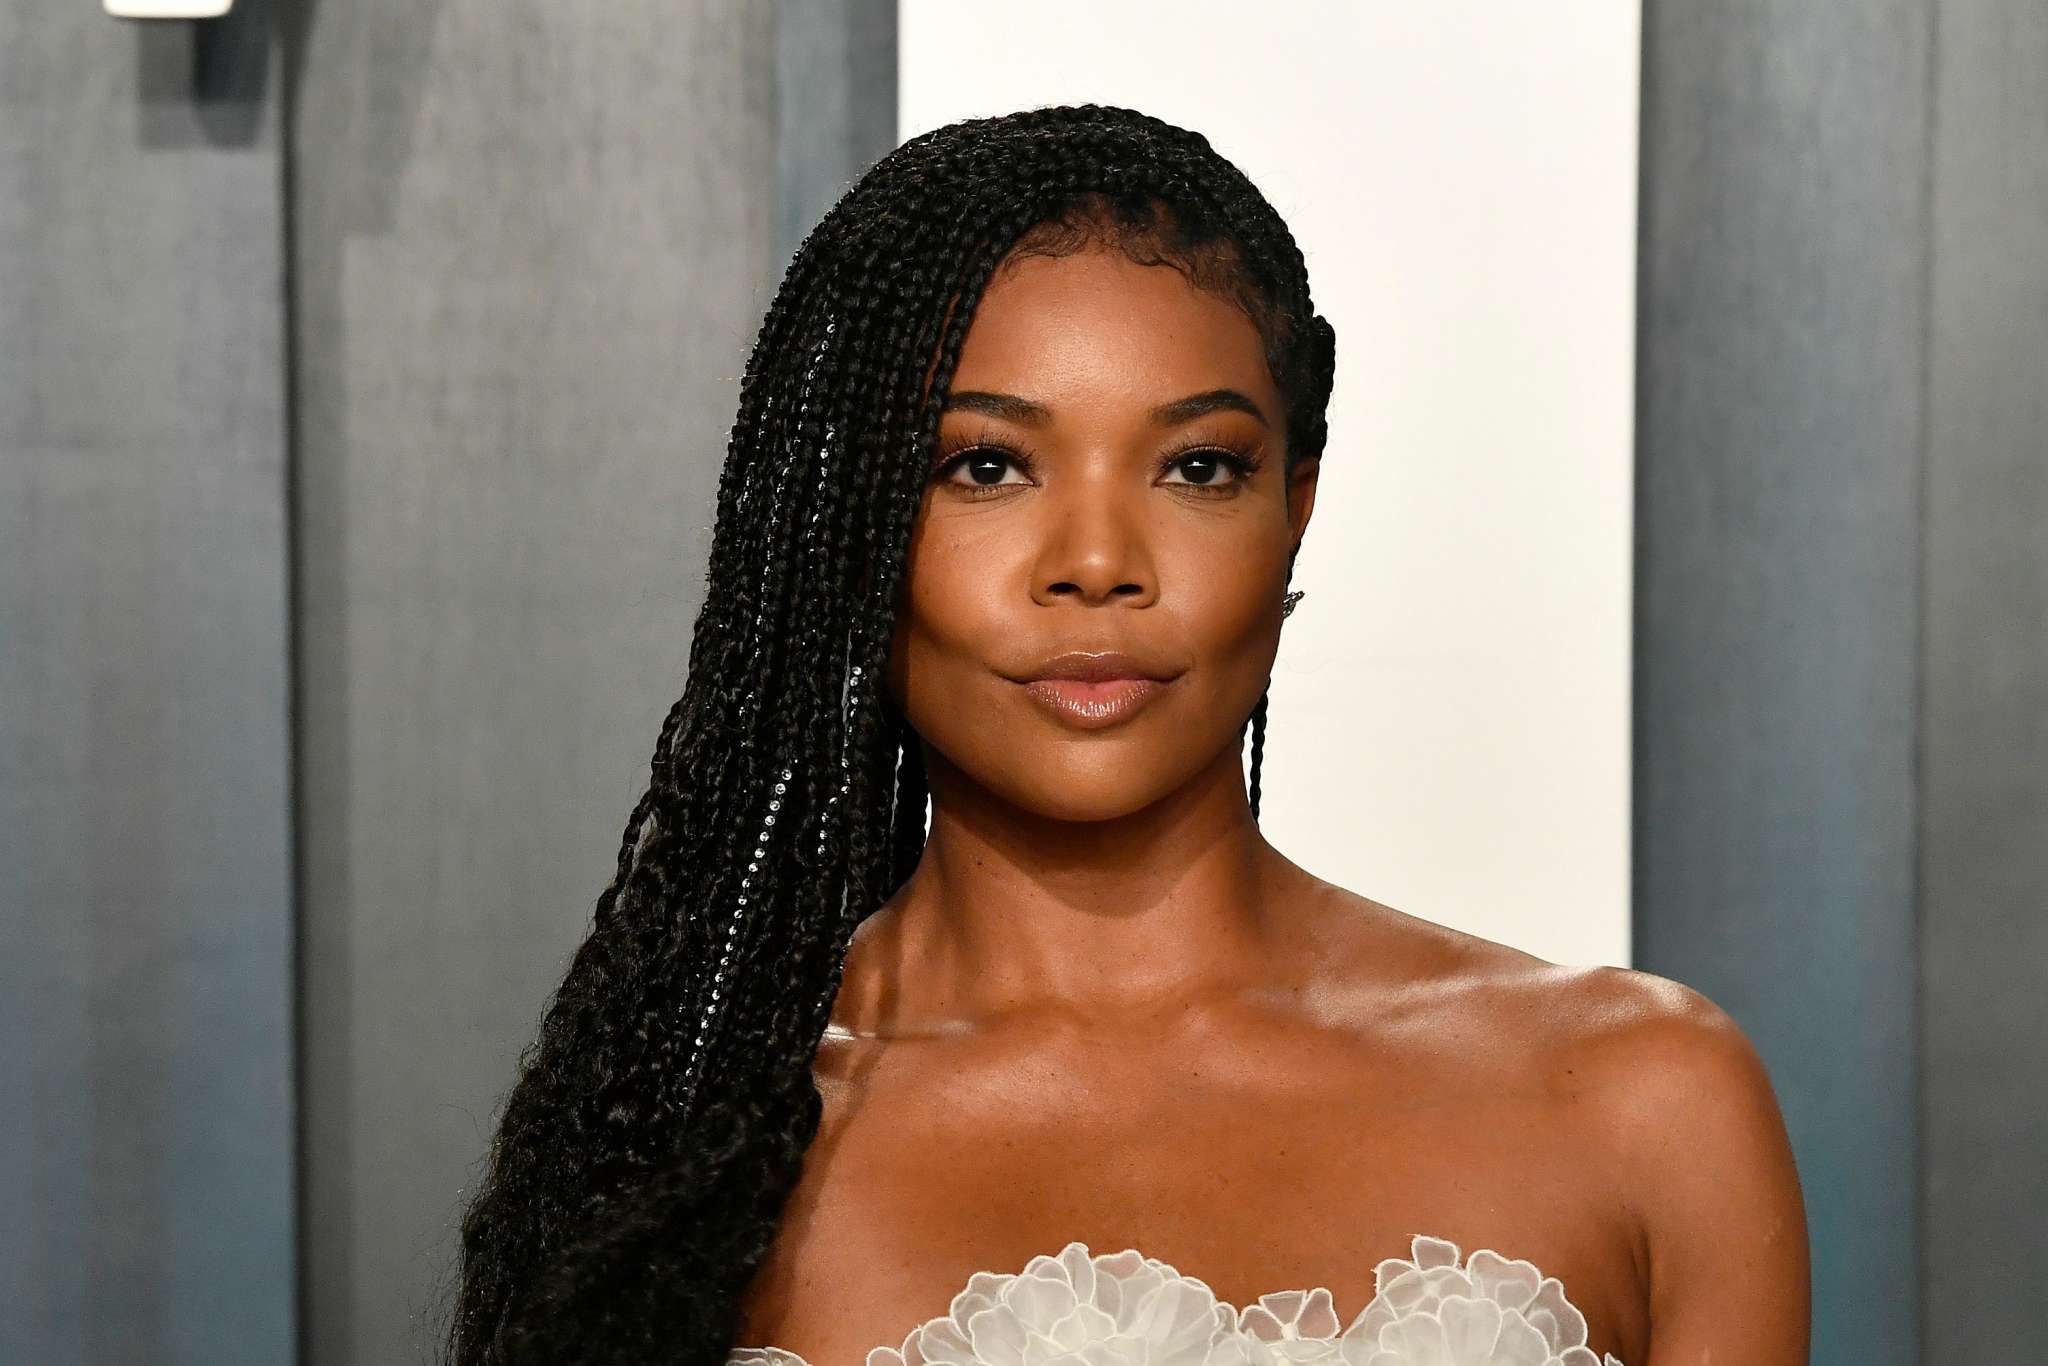 gabrielle-union-shares-a-message-that-would-make-kobe-bryant-proud